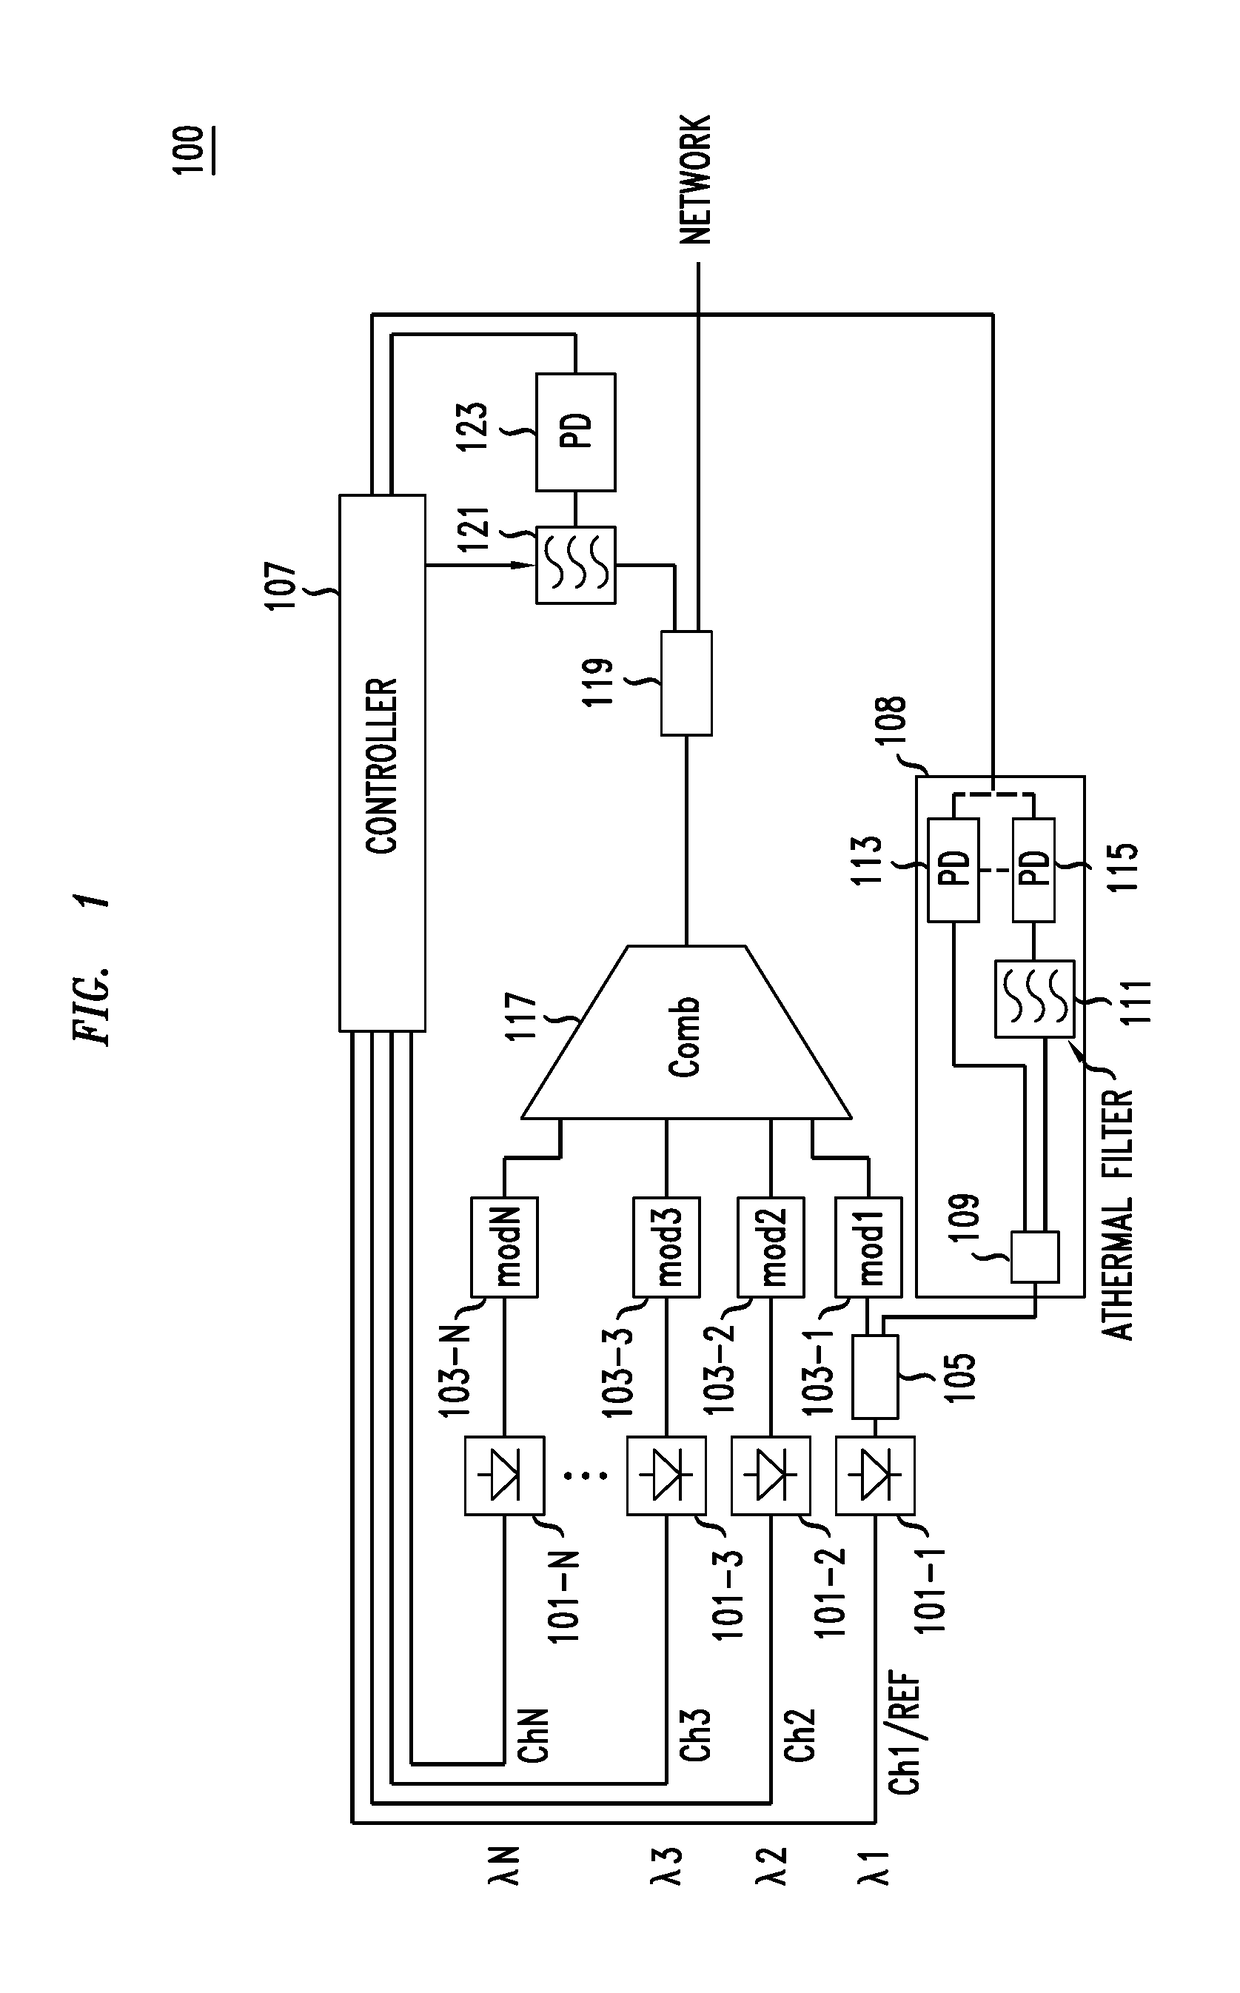 Method And Apparatus For Locking WDM Transmitter Carriers To A Defined Grid